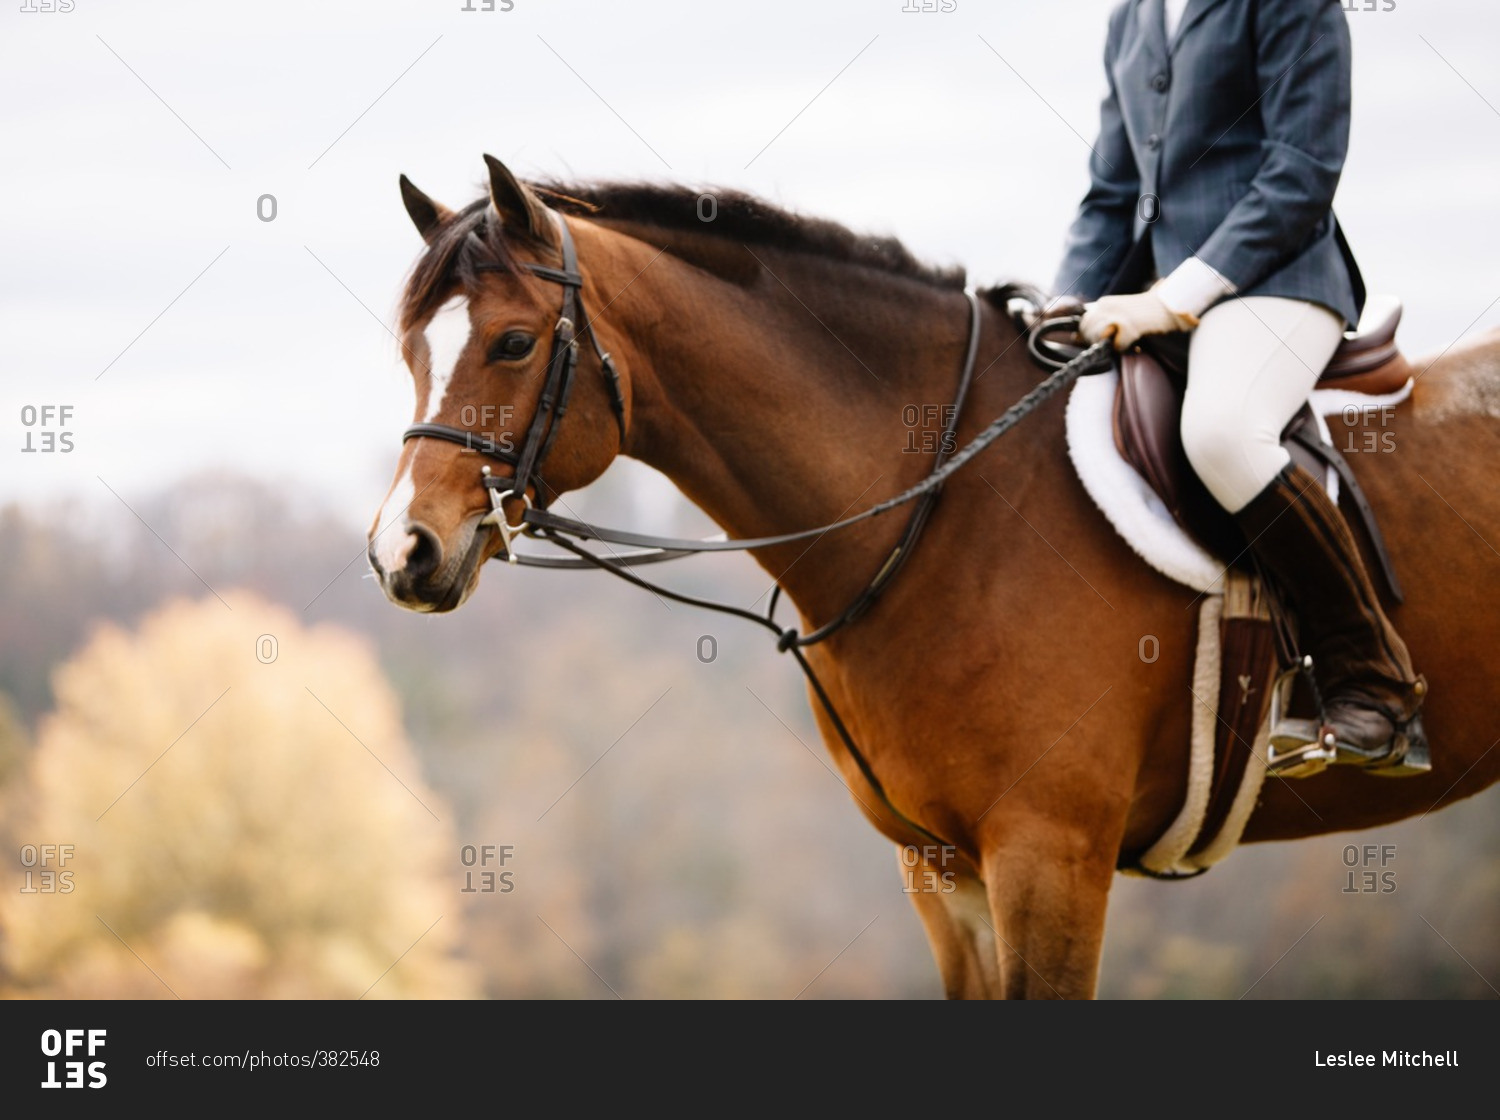 Young woman in riding gear sitting horseback